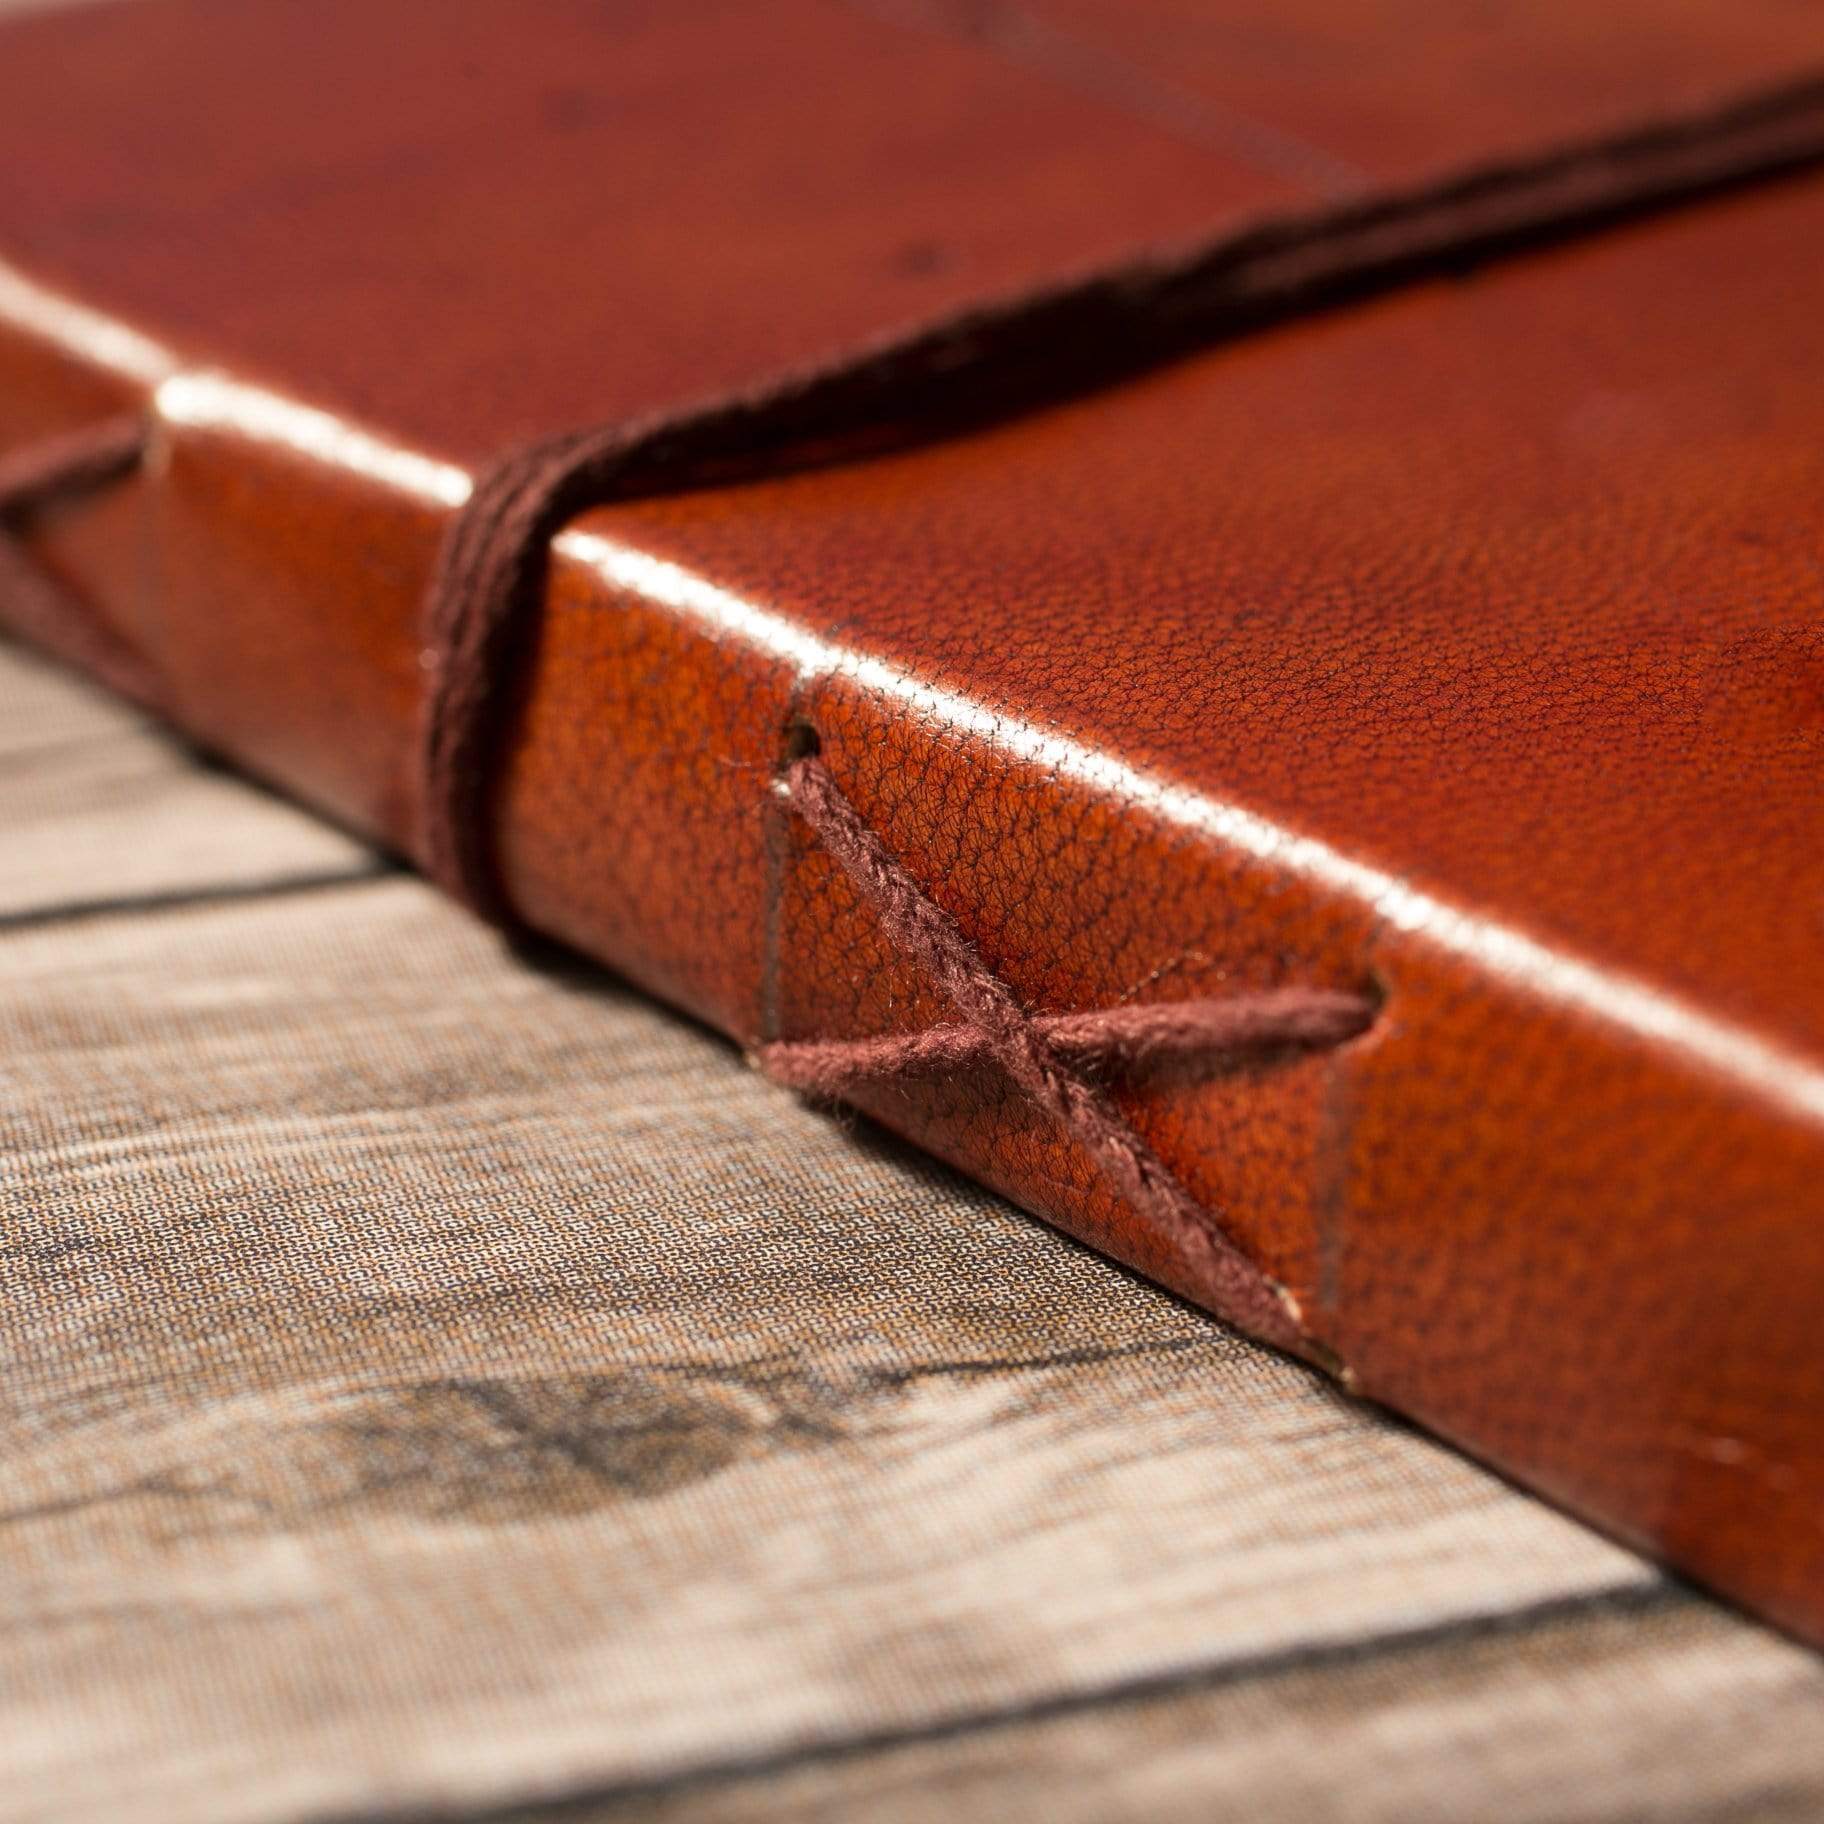 "Instinct Is A Marvelous Thing" Agatha Christie Handcrafted Leather Embossed Journal - Leather Journals By Soothi